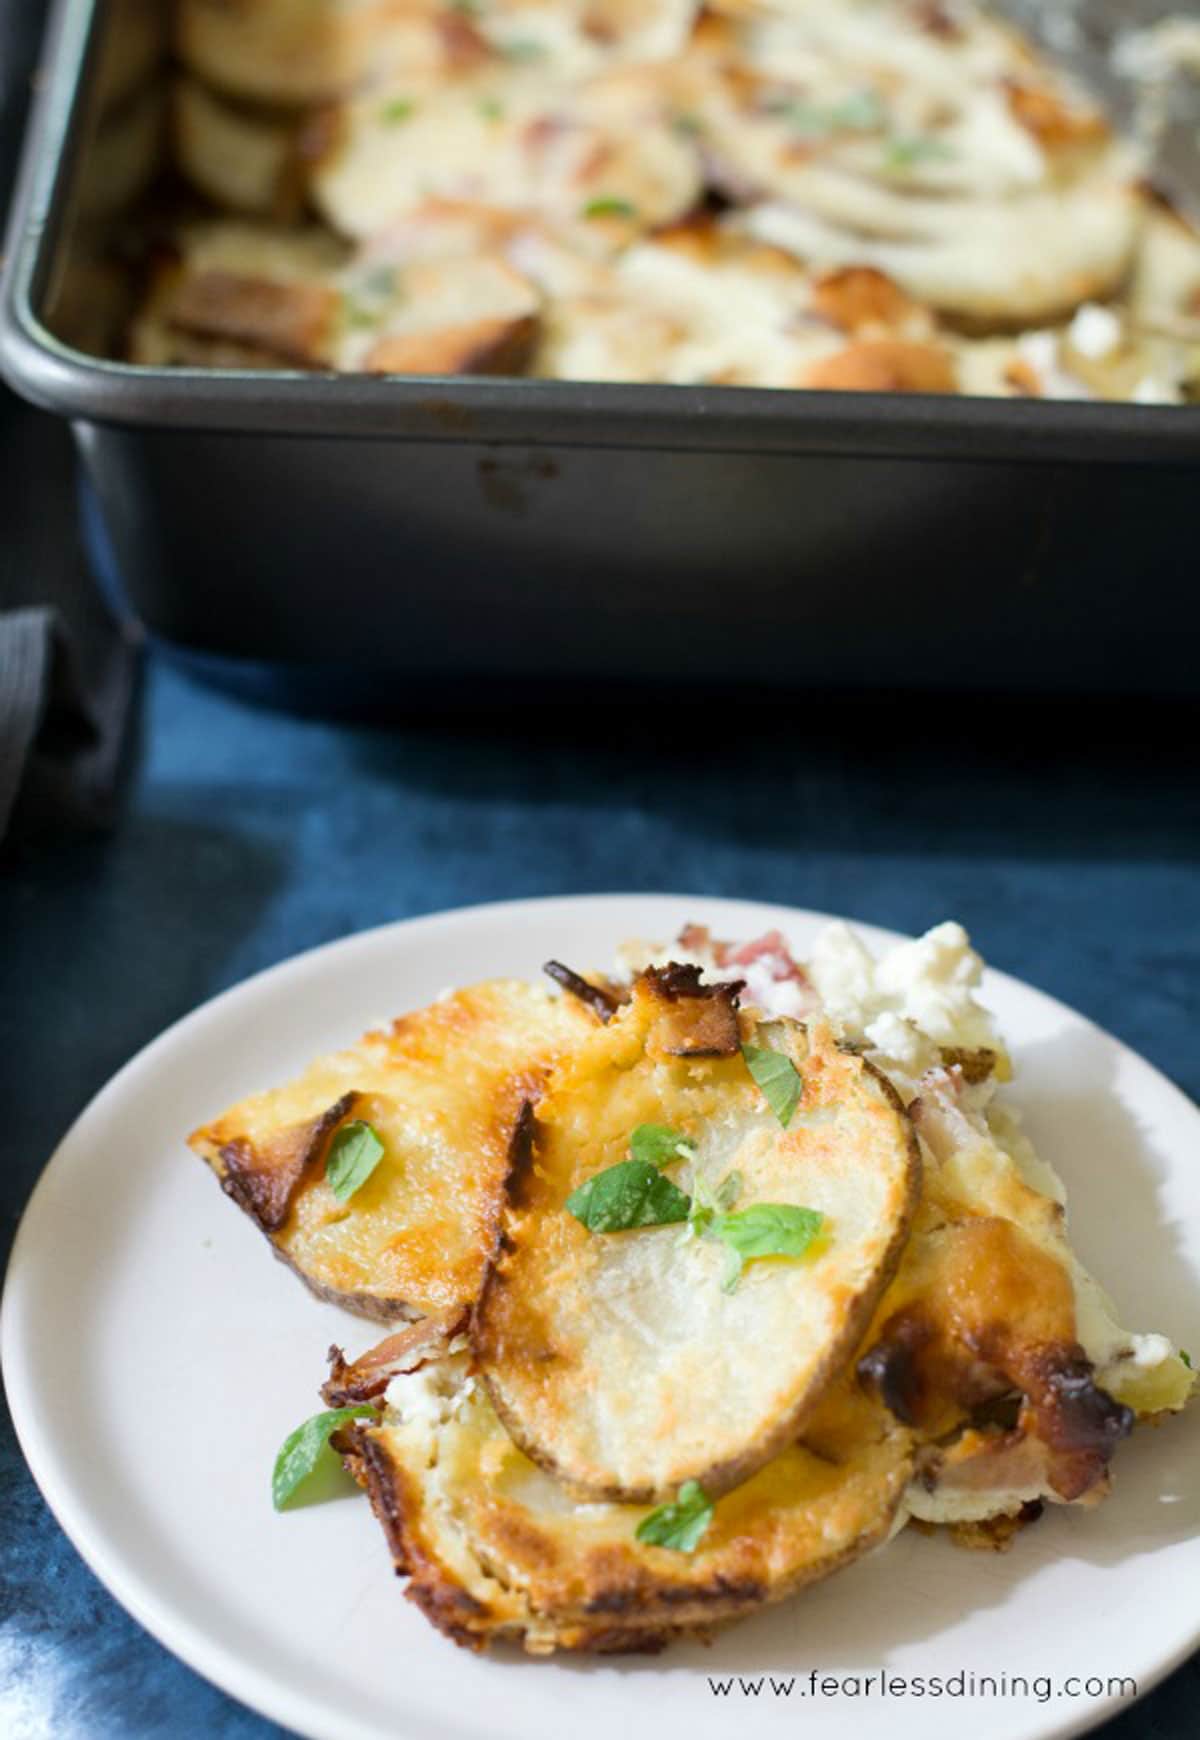 The gluten free scalloped potatoes on a plate.